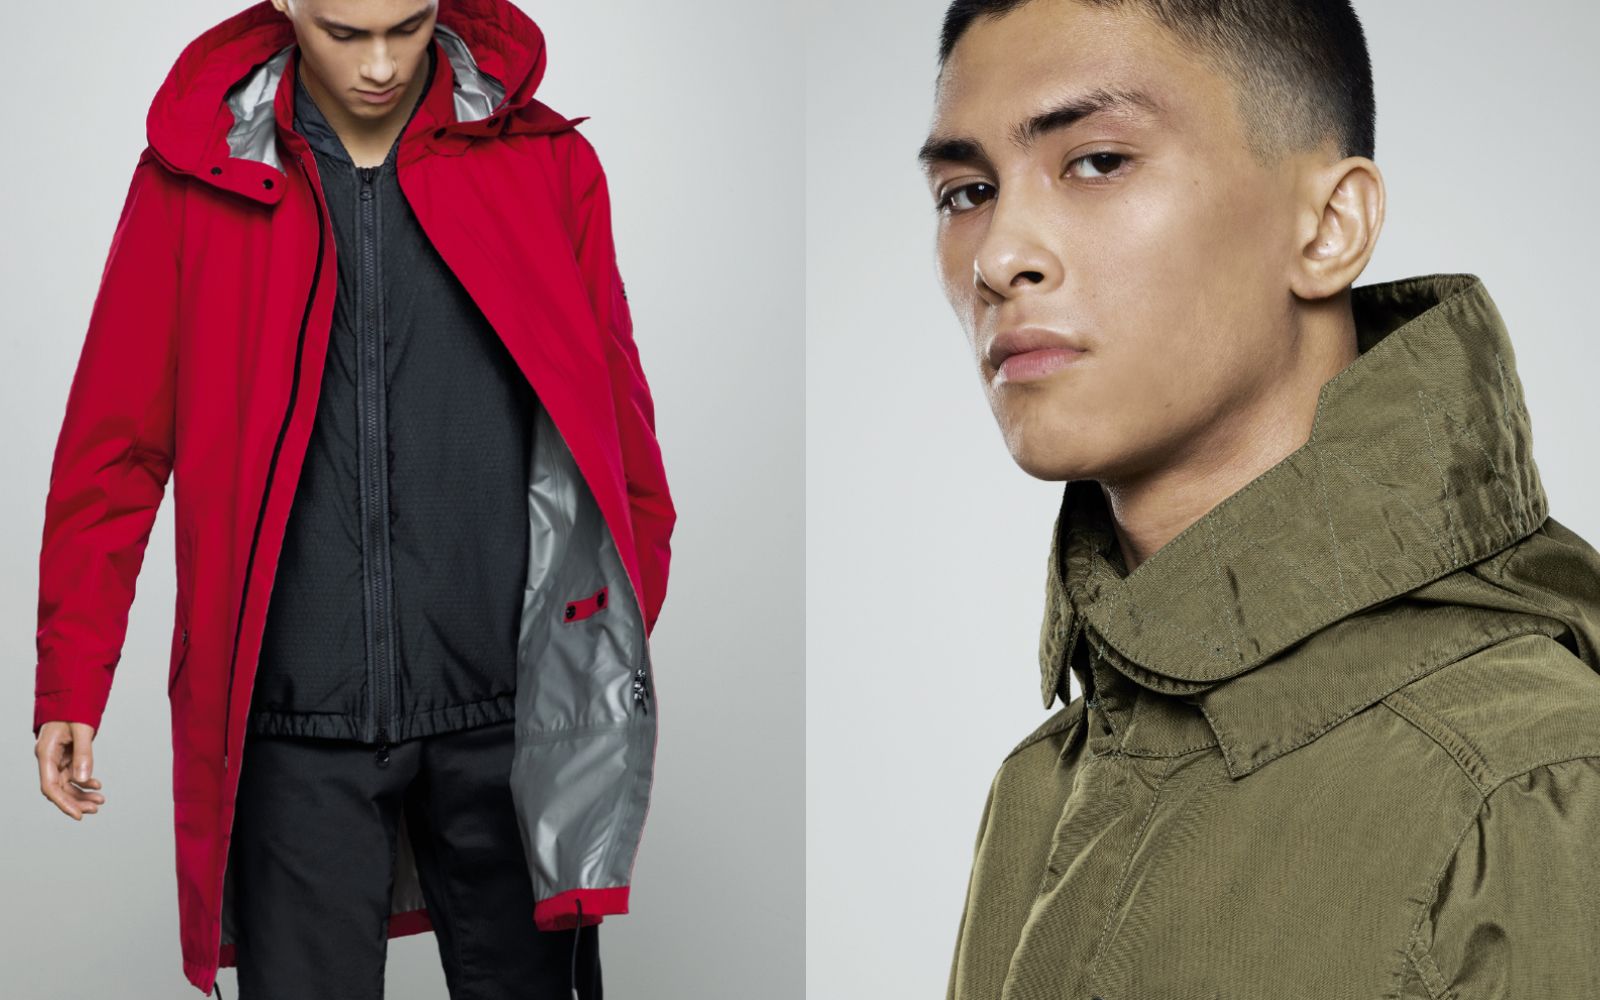 The SS21 collection by Stone Island Shadow Project